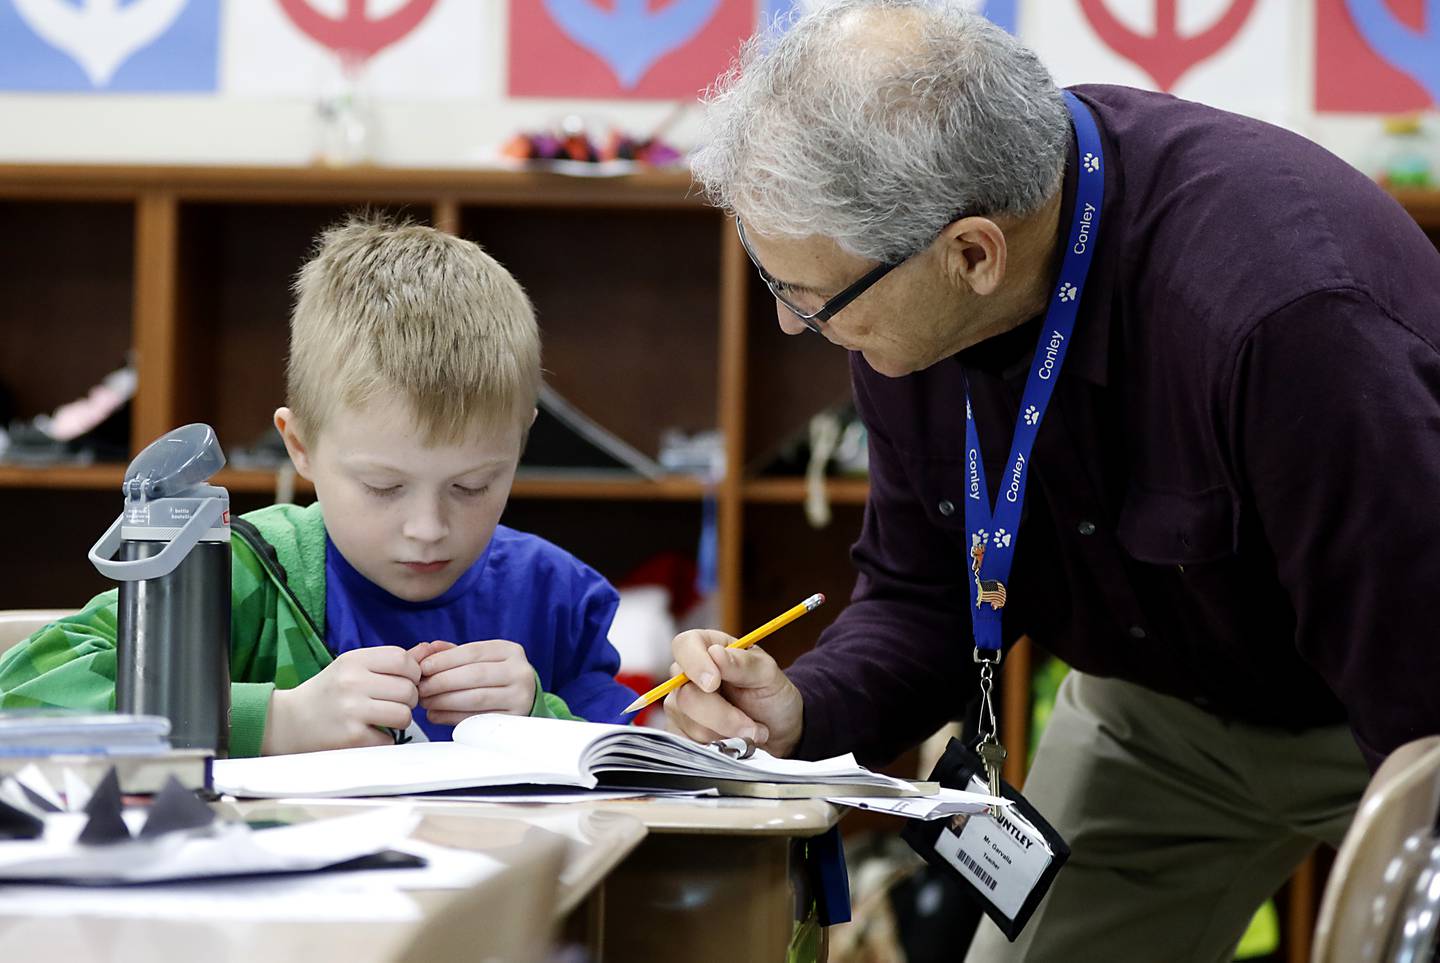 Fifth-grade teacher Jim Garvalia works one-on-one with Declan Jensen as he explains how to solve a math problem Wednesday, Oct, 26, 2022, in the classroom co-taught by Garvalia and Jennifer Hollabaugh at Conley Elementary School, 750 Dr. John Burkey Drive in Algonquin.